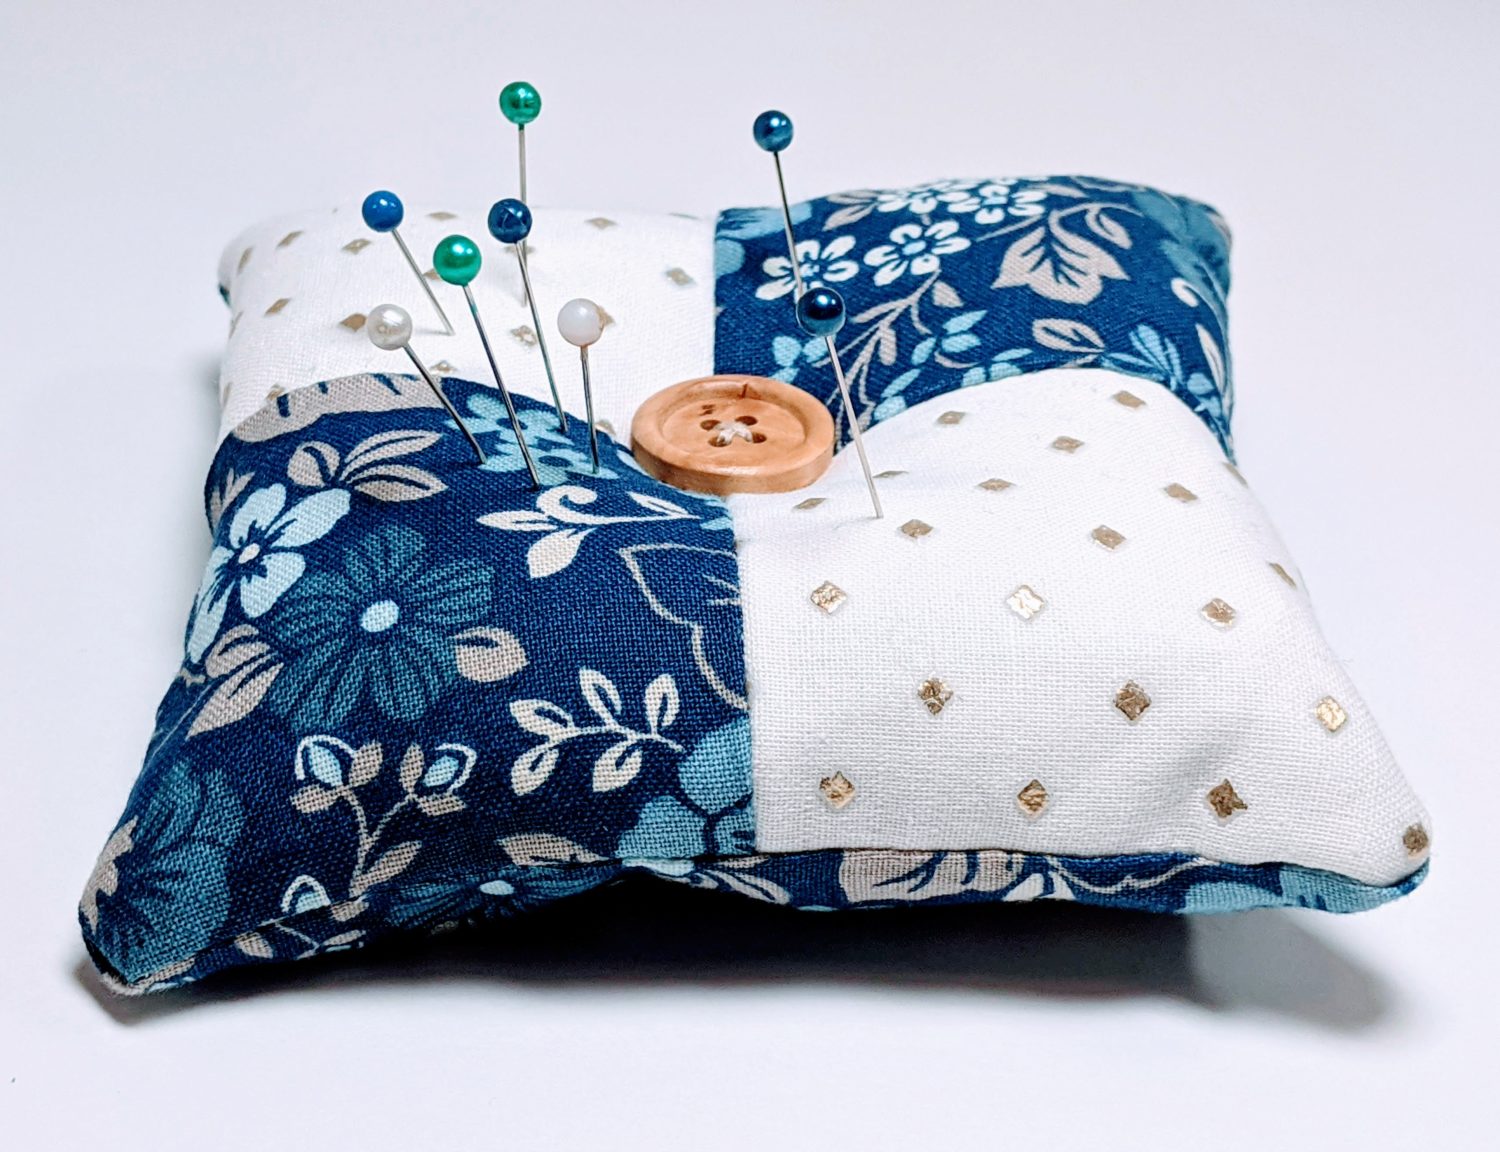 How to make a pin cushion for your sewing supplies